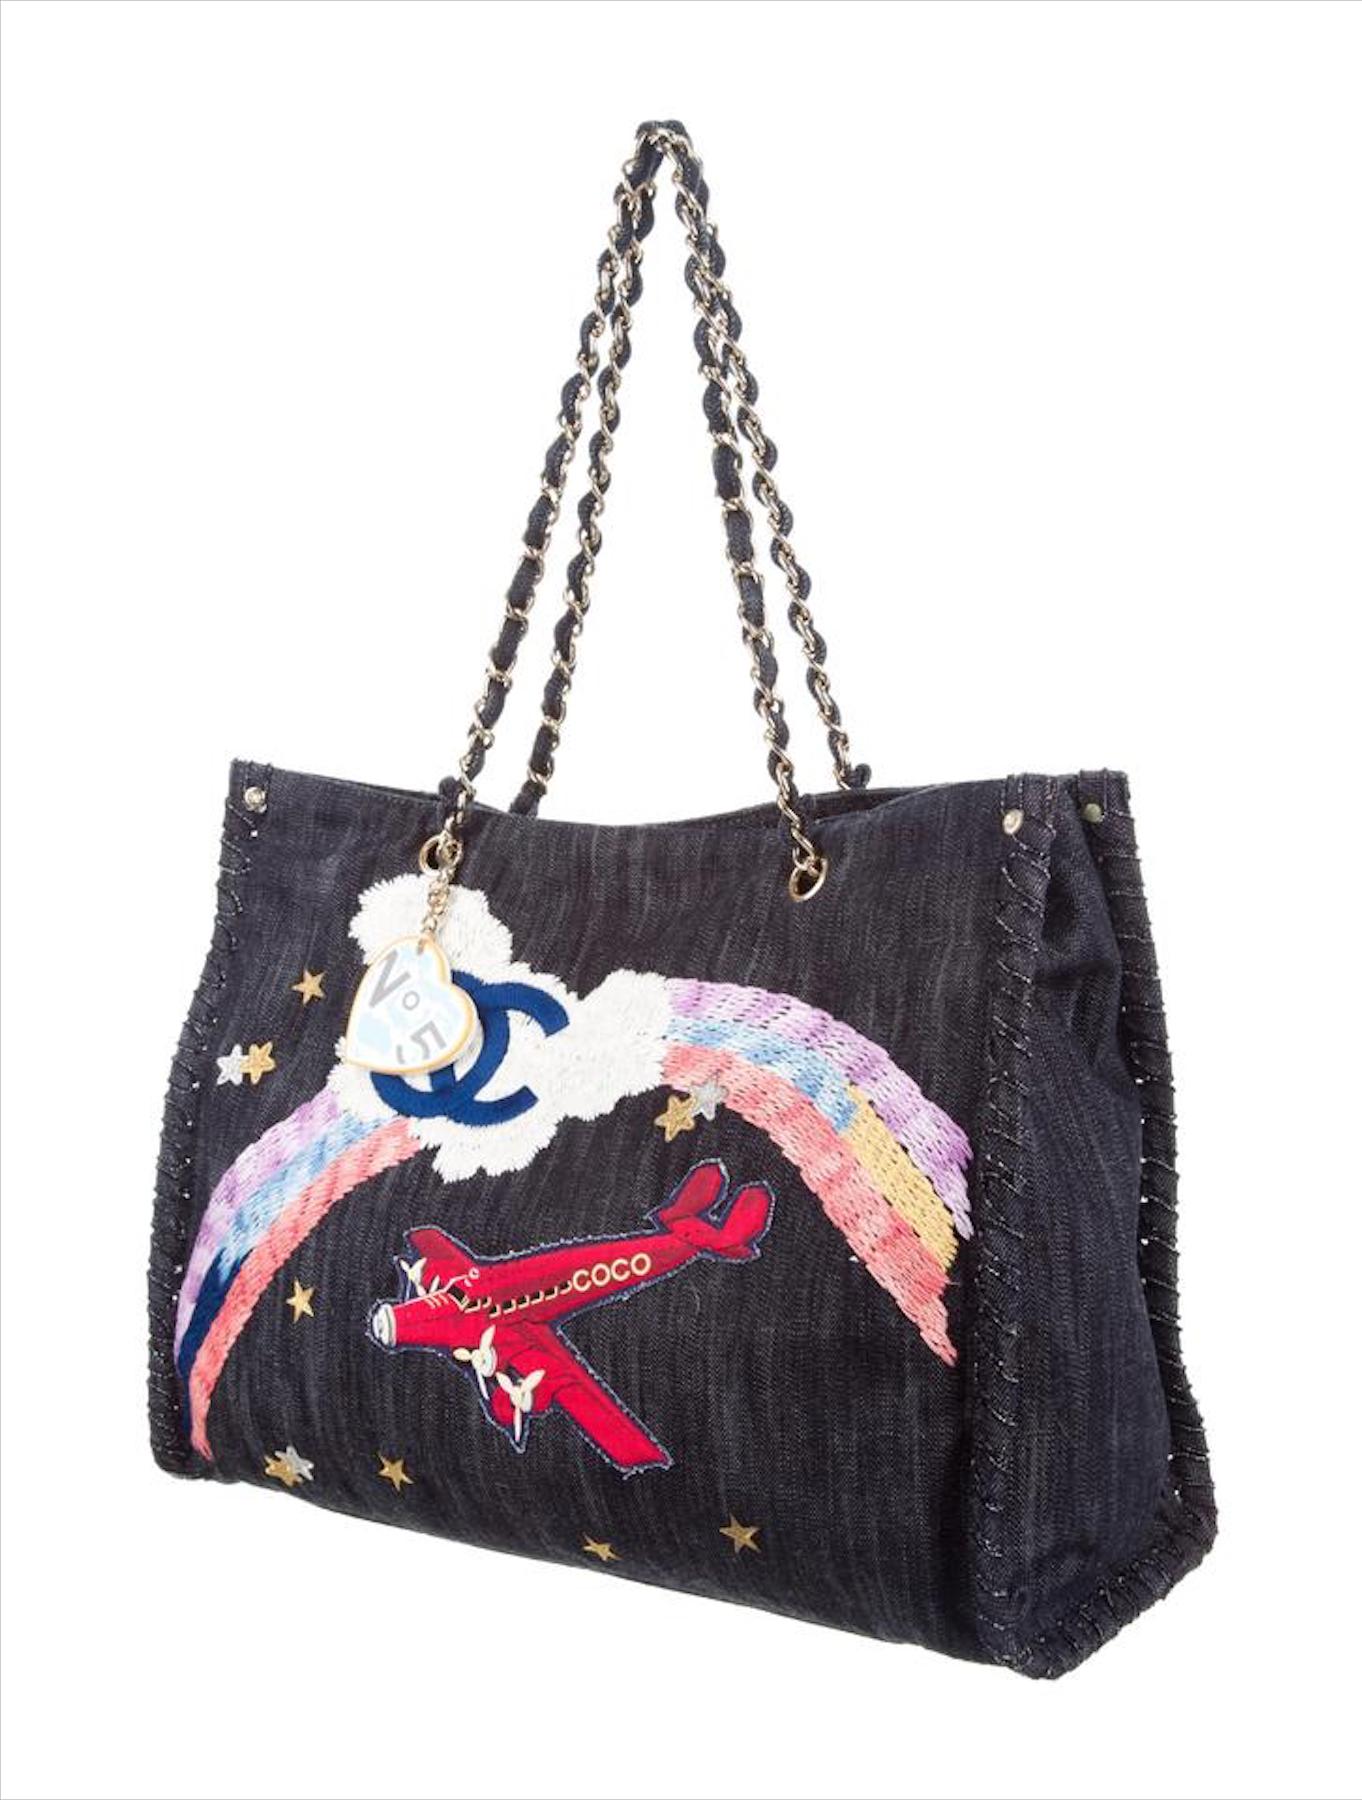 Chanel 2005 Vintage Airplane Rainbow Mixed Media Blue Jean Denim Rare Tote Bag In Good Condition For Sale In Miami, FL